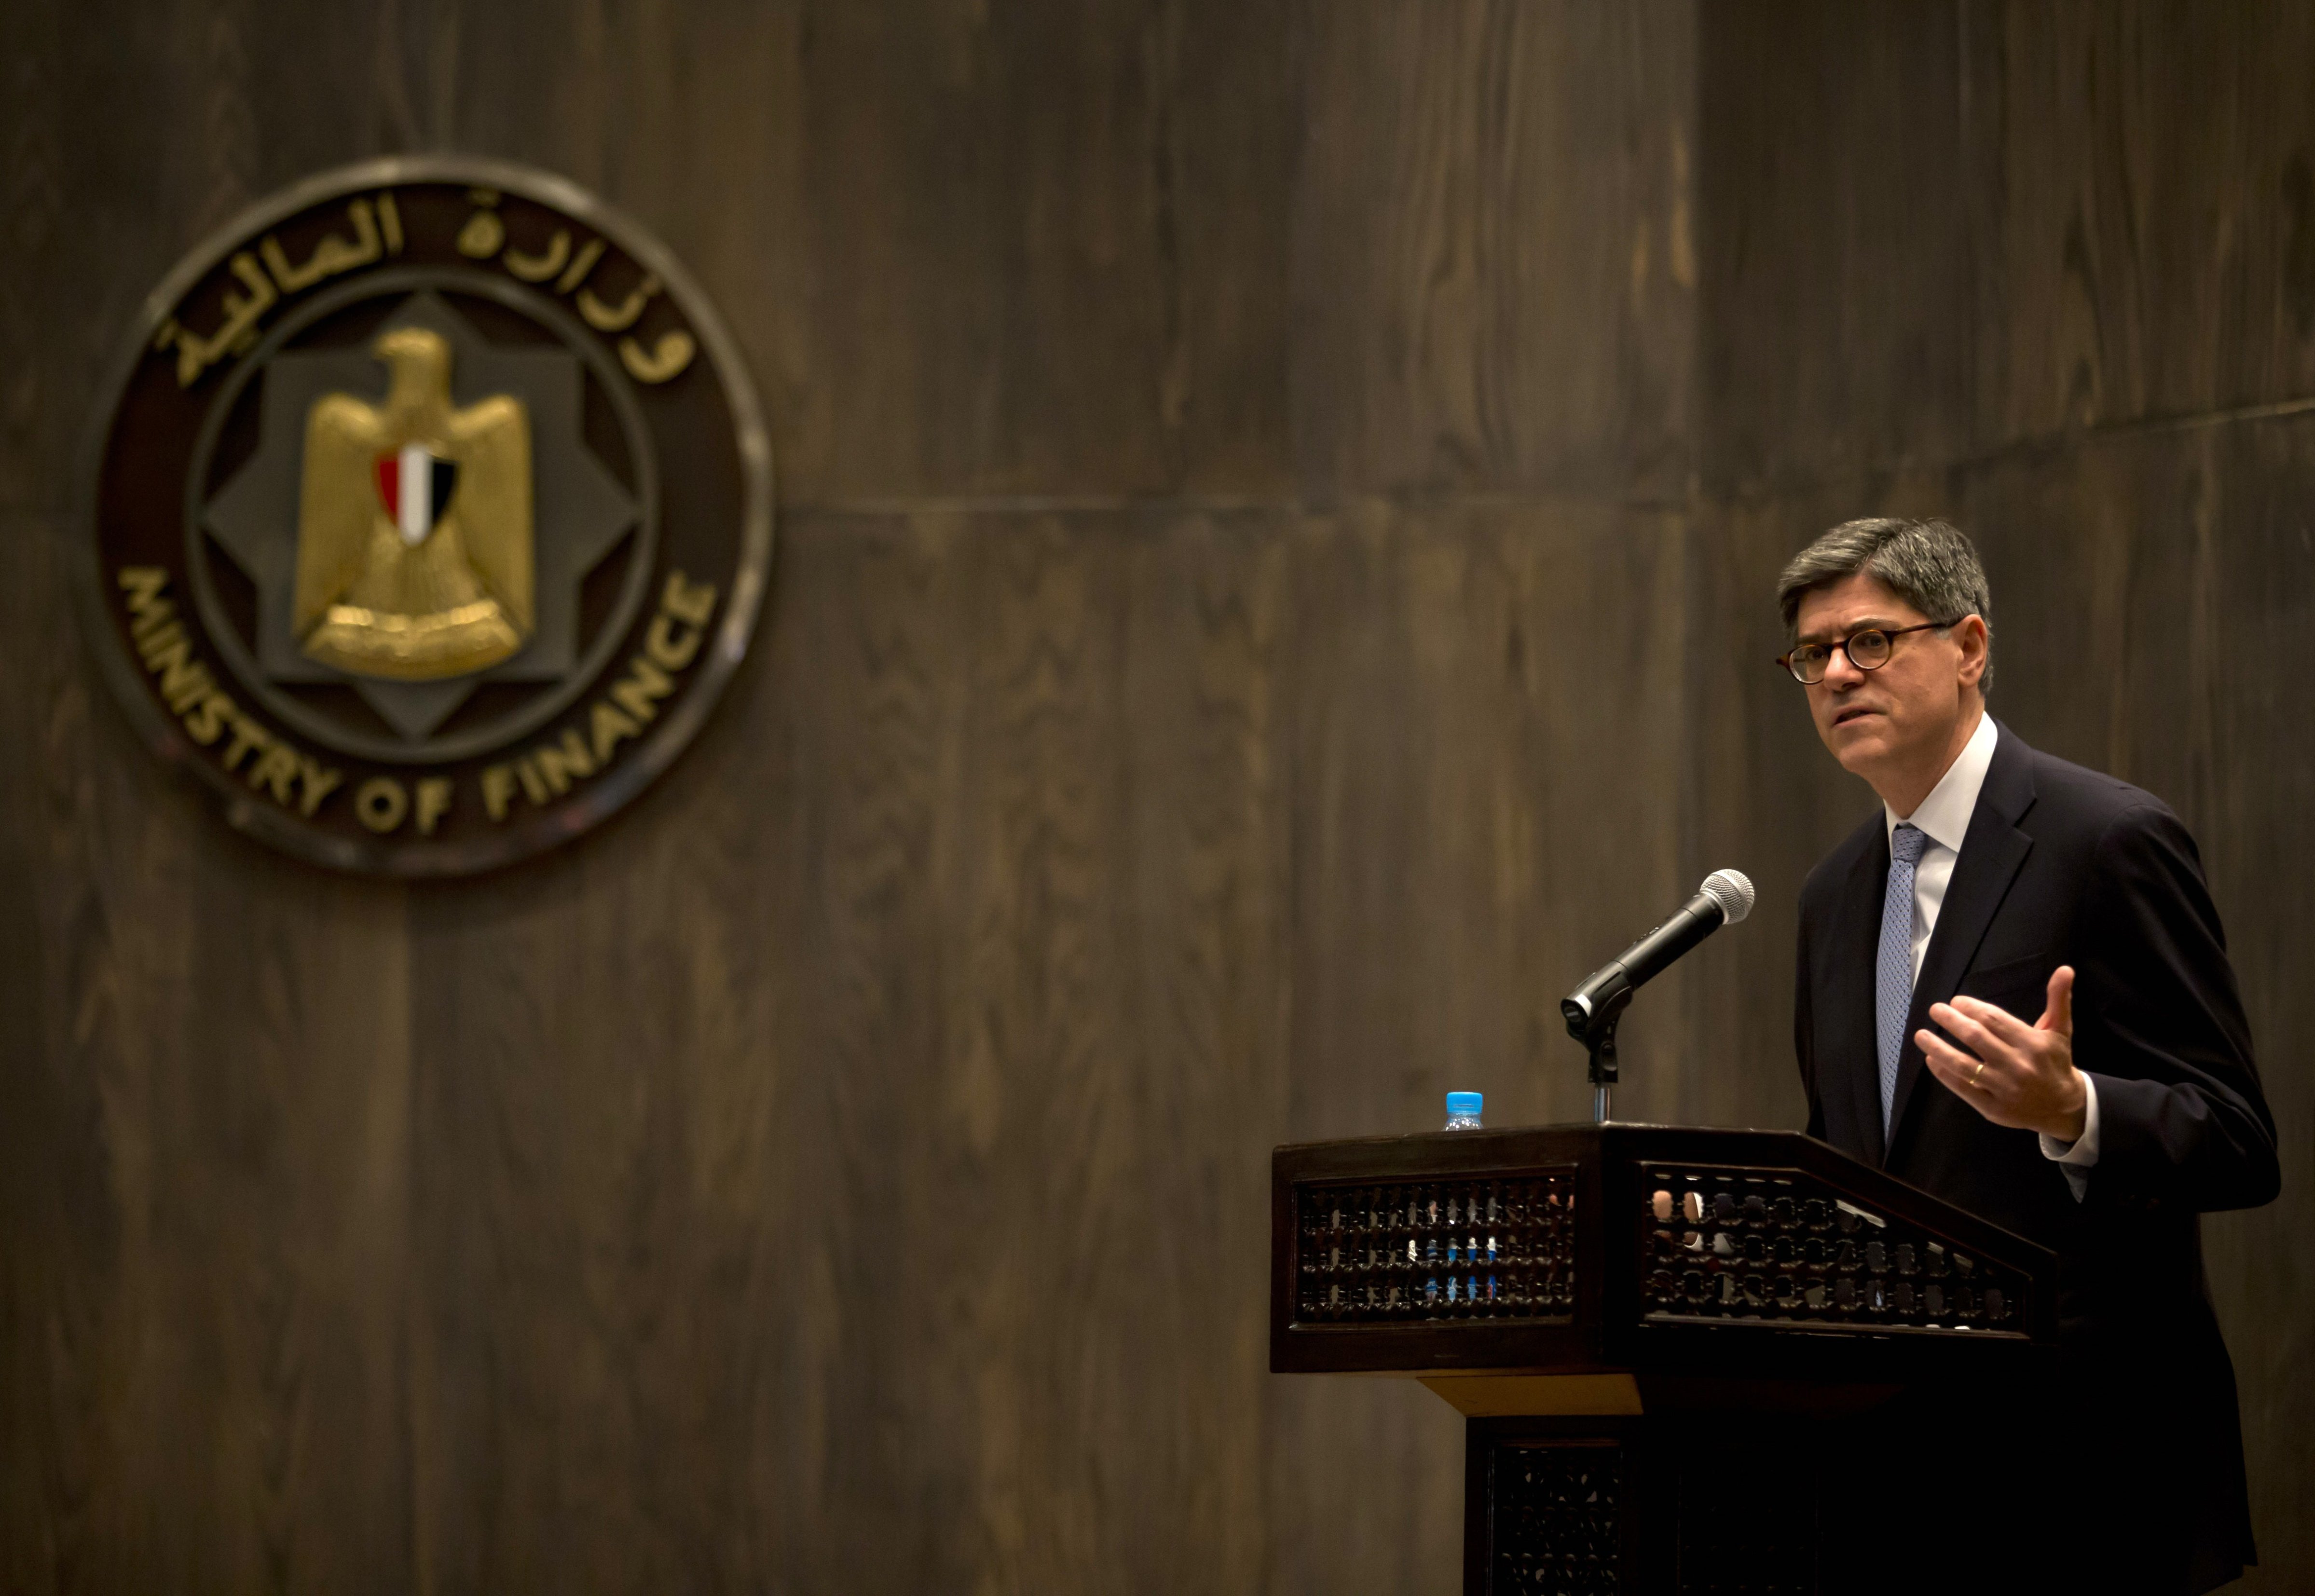 US Treasury Secretary Jacob Lew gives a joint press conferece with Egyptian finance minister Hany Dimian (unseen) at the Egyptian Ministry of Finance in Cairo on Oct. 27, 2014.